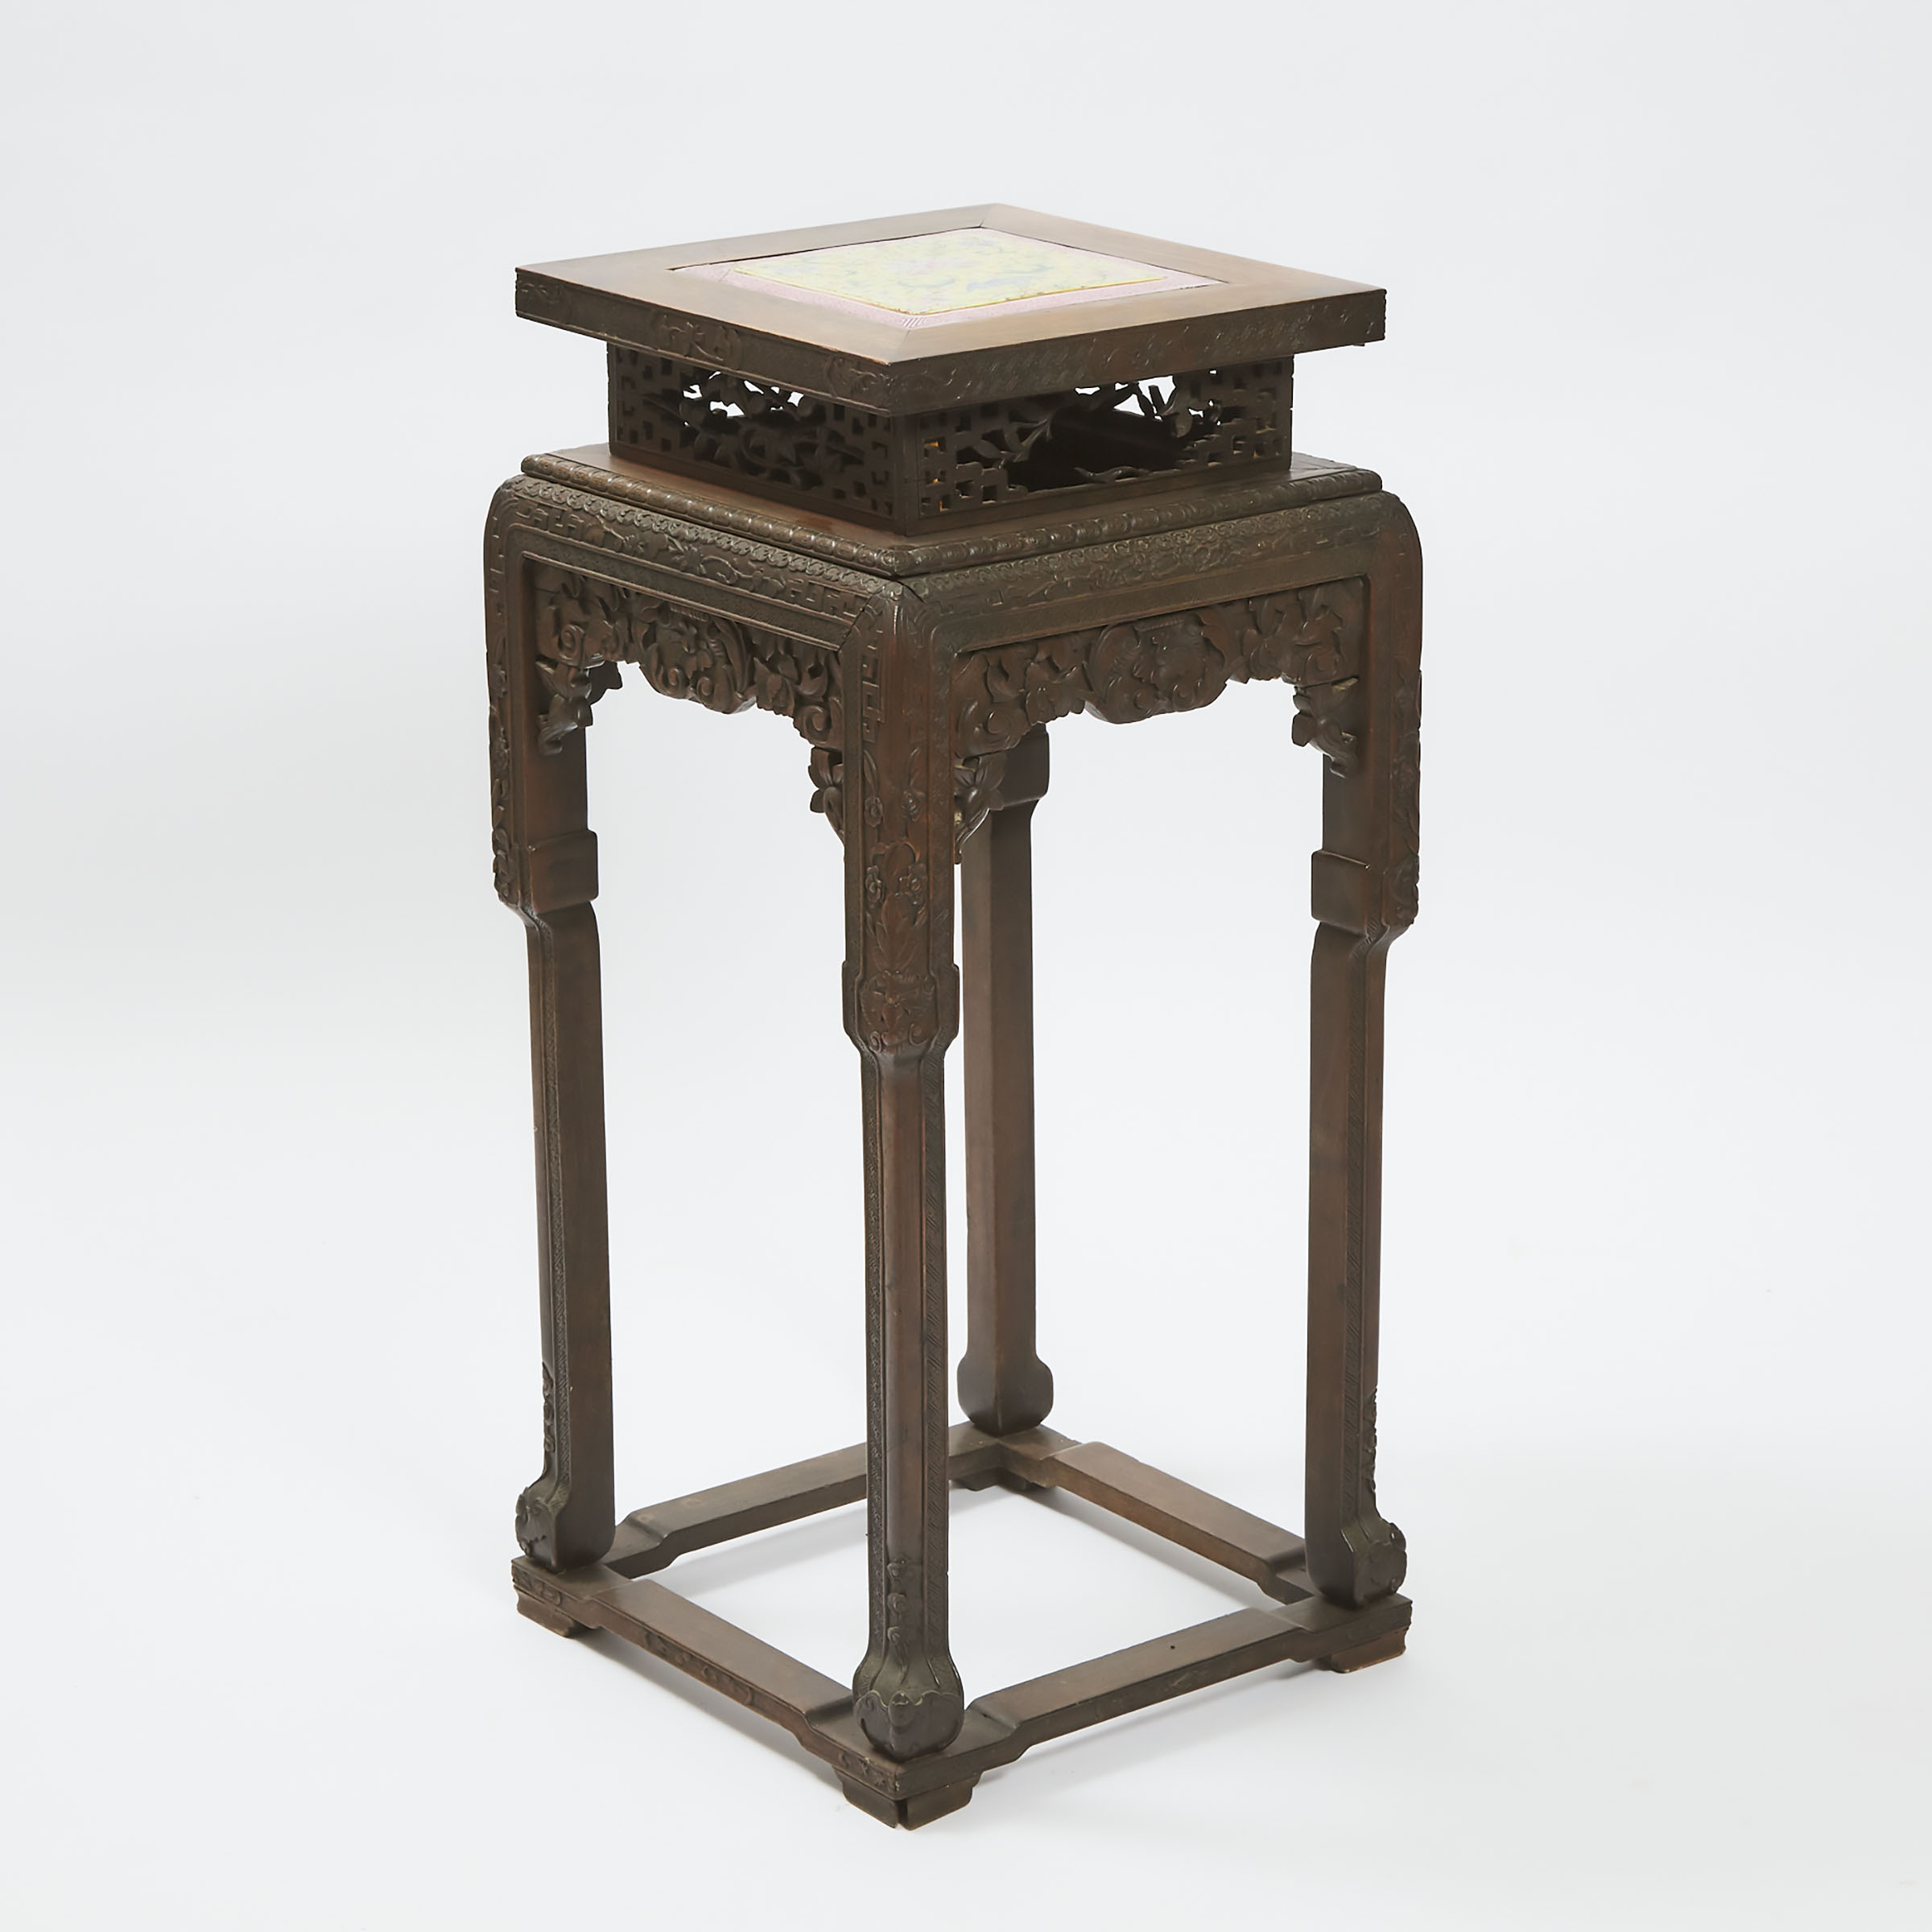 A Chinese Porcelain Panel-Inset Rosewood Stand, 19th Century